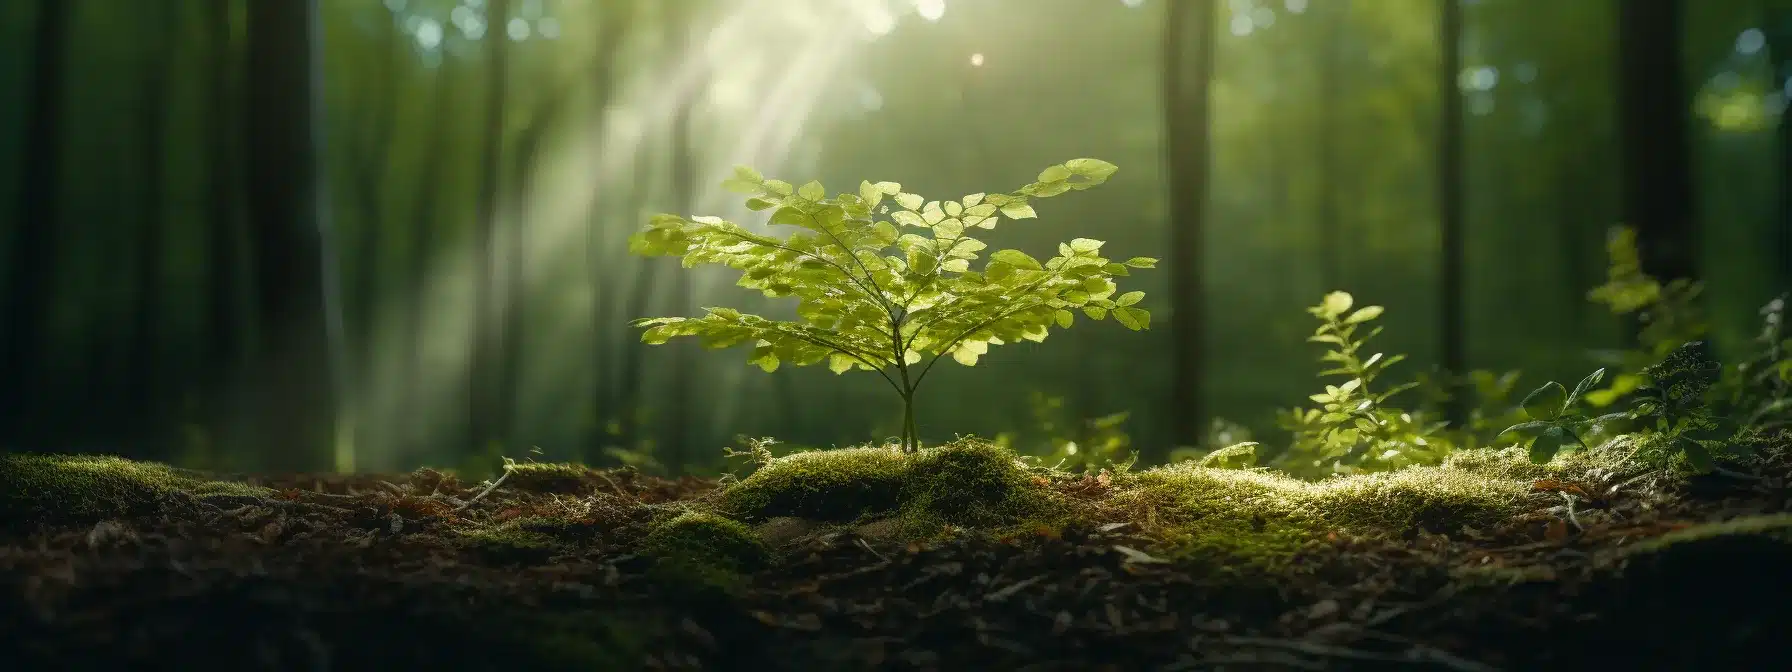 A Tree Growing In A Digital Marketing Forest With The Sun Shining, Rain Falling, And Wind Blowing.